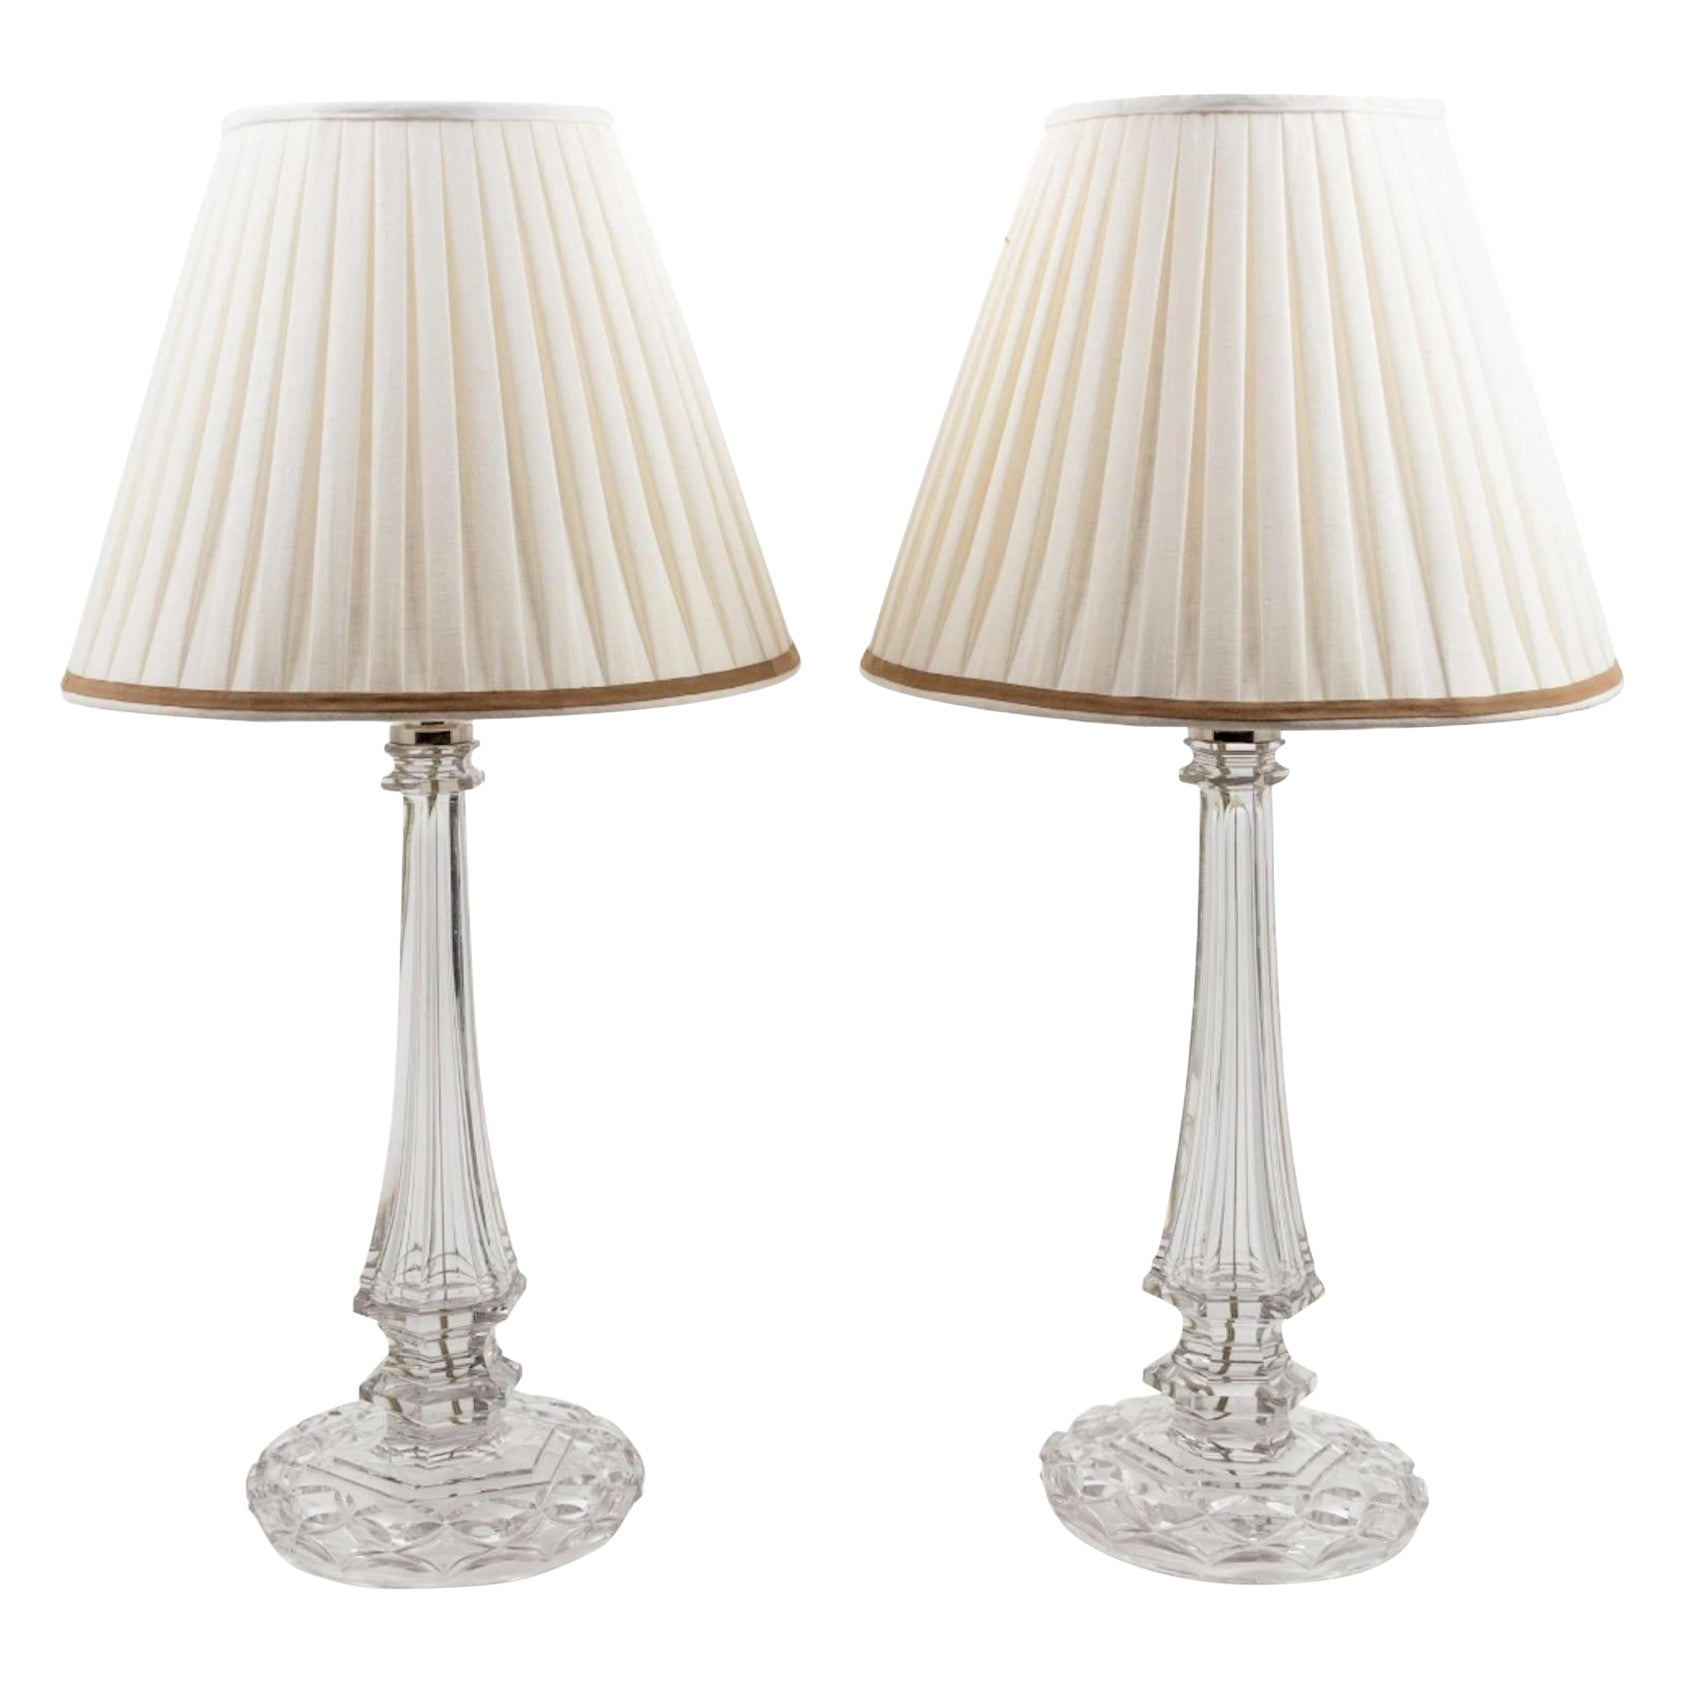 Pair of Cut Glass Lamps 19th Century, Property of an Important Collection For Sale